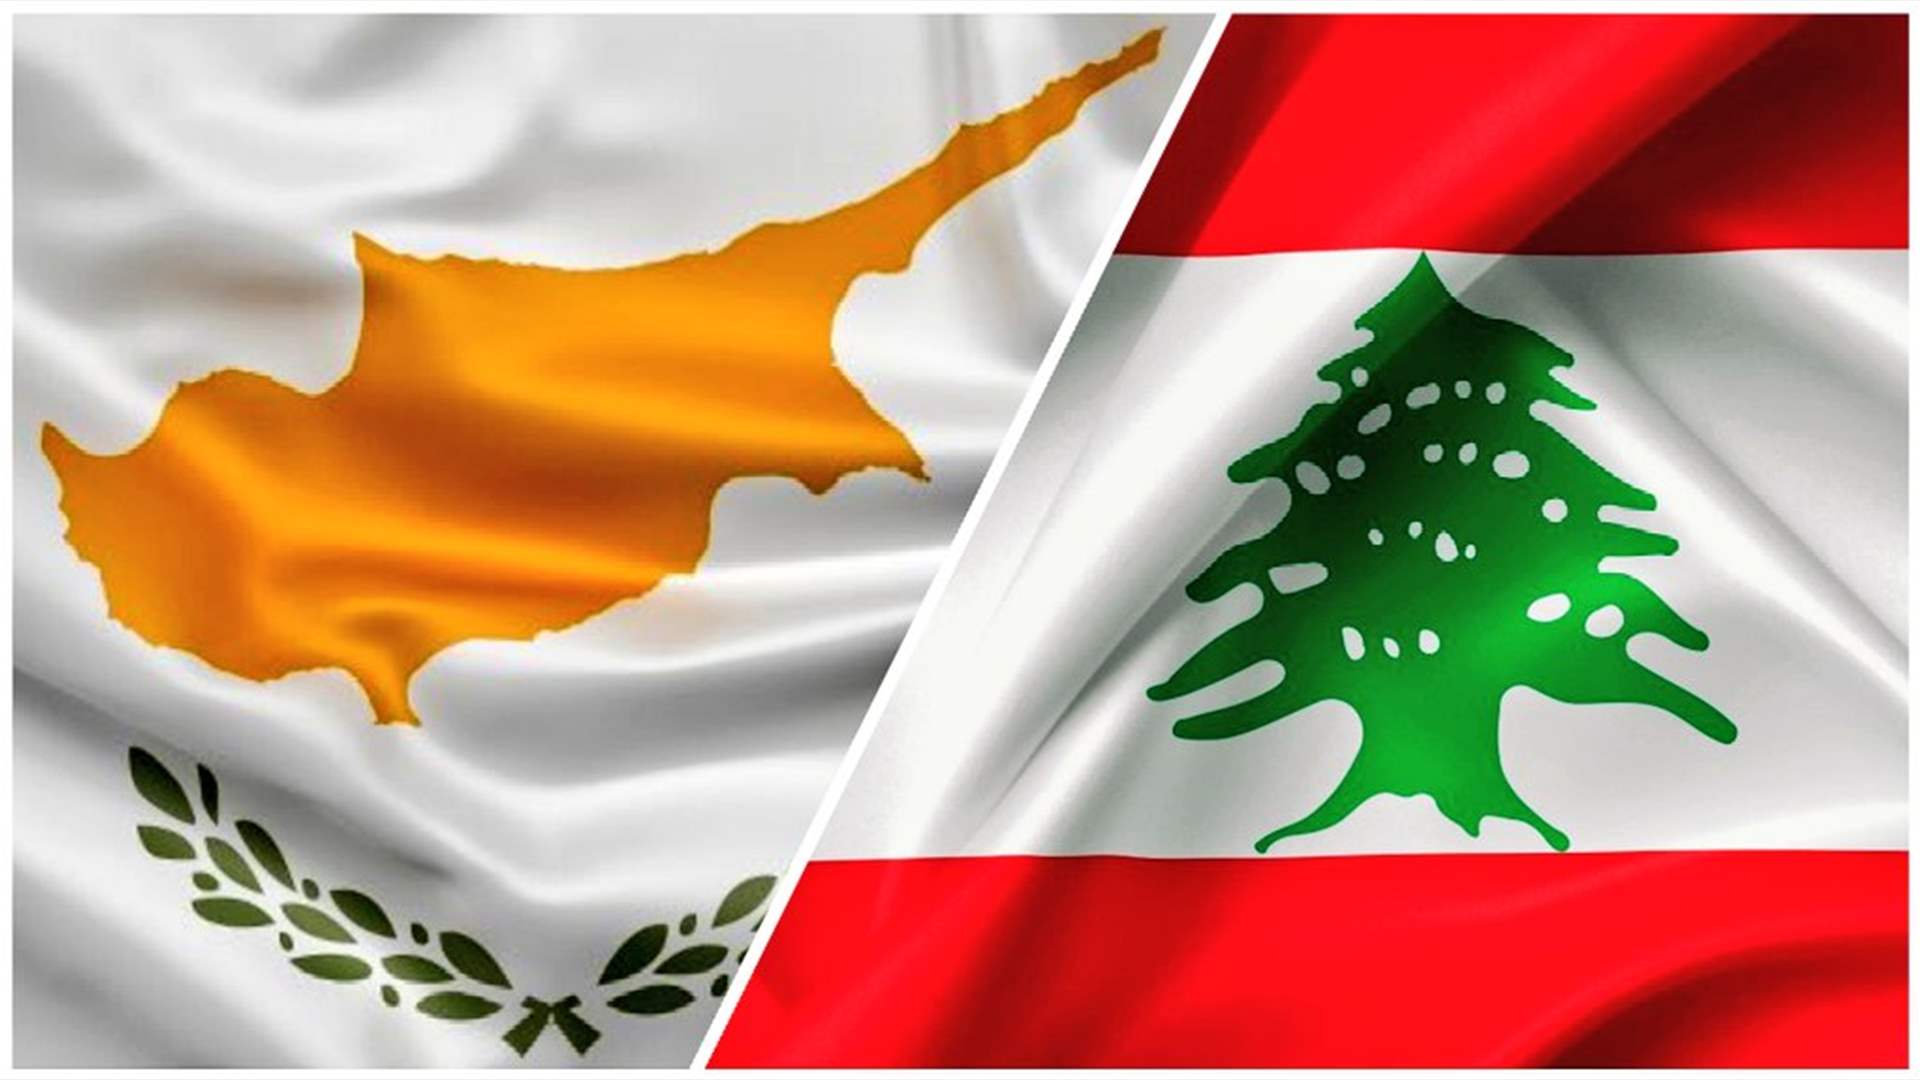 Maritime borders: Broken promises and discontent between Lebanon and Cyprus